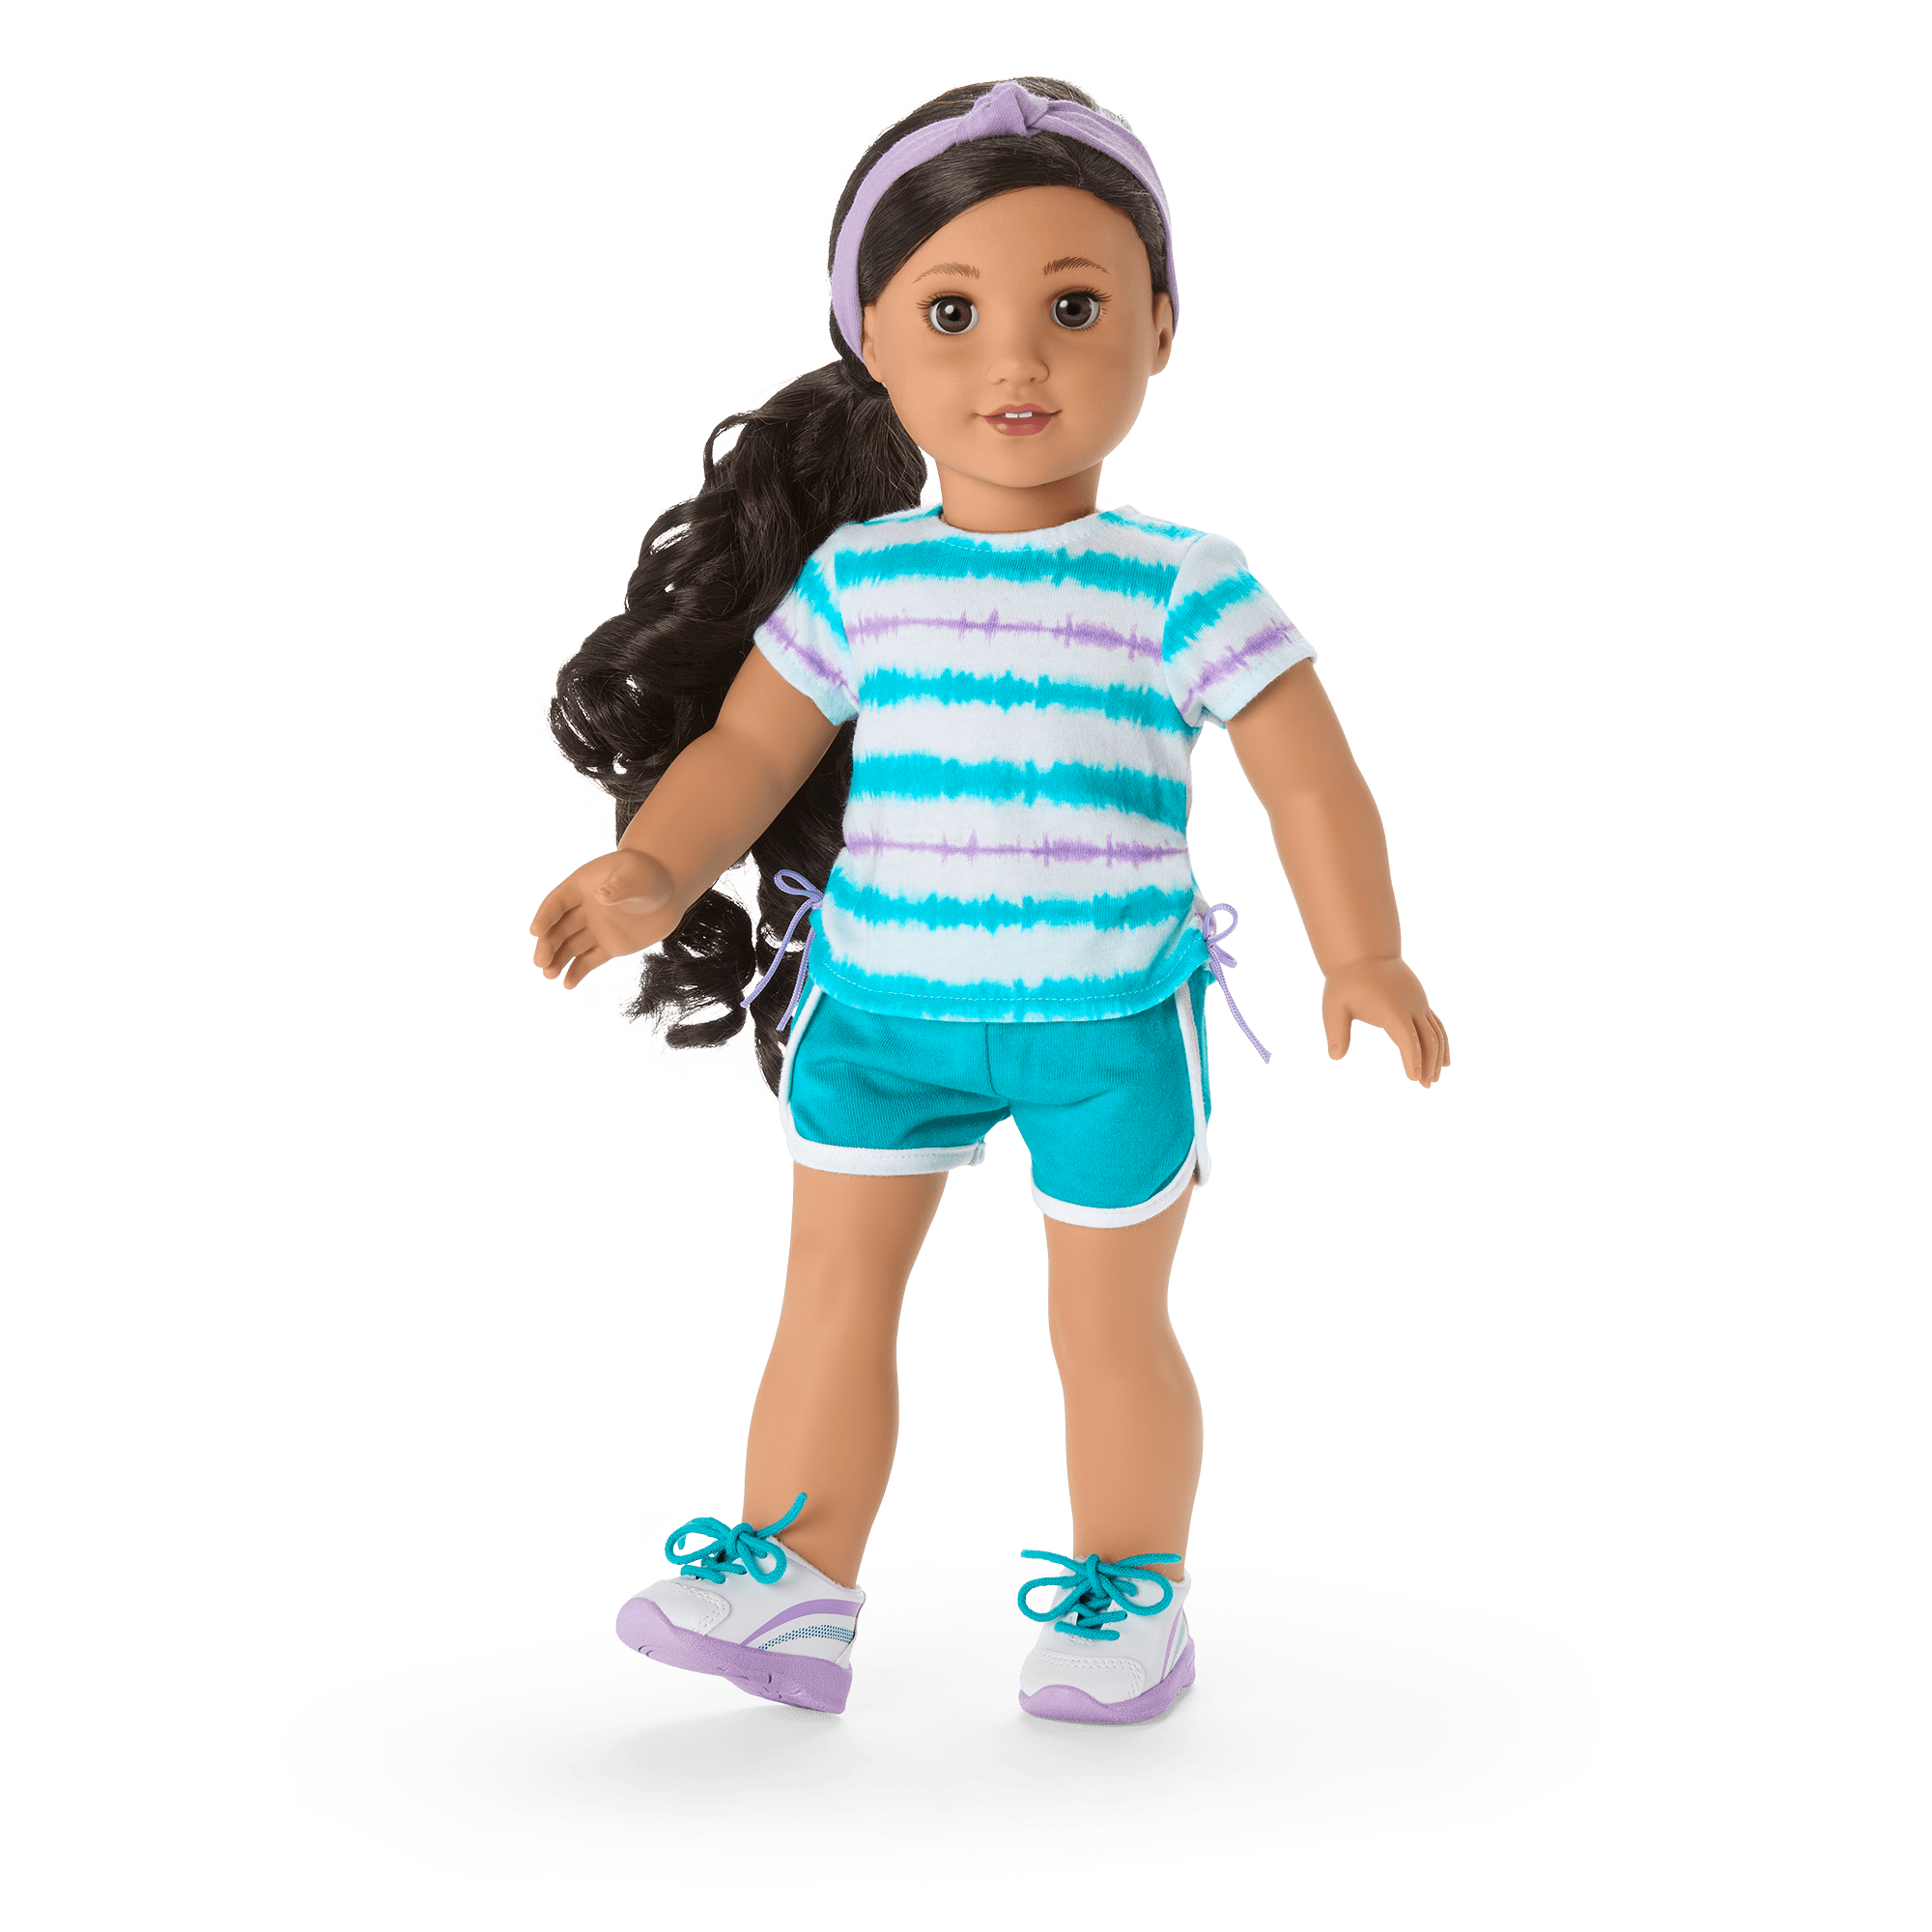 The New York Doll Collection Doll Backpack/ Shoulder Bag Fits 18 inch Dolls